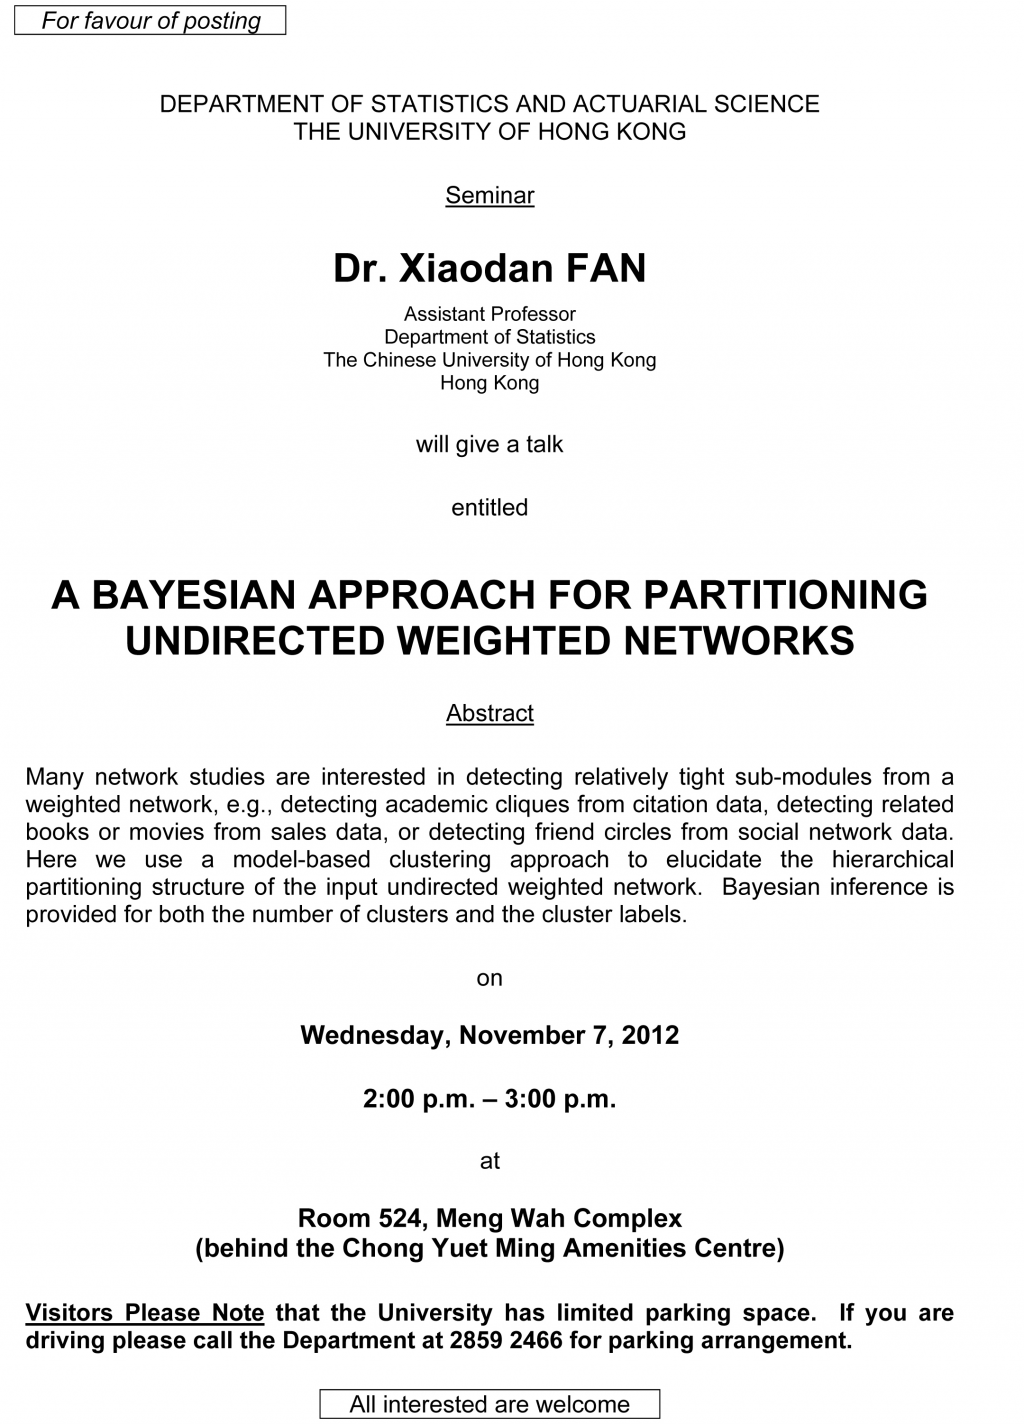 Seminar on 'A Bayesian approach for partitioning undirected weighted networks' by Dr. Xiaodan FAN